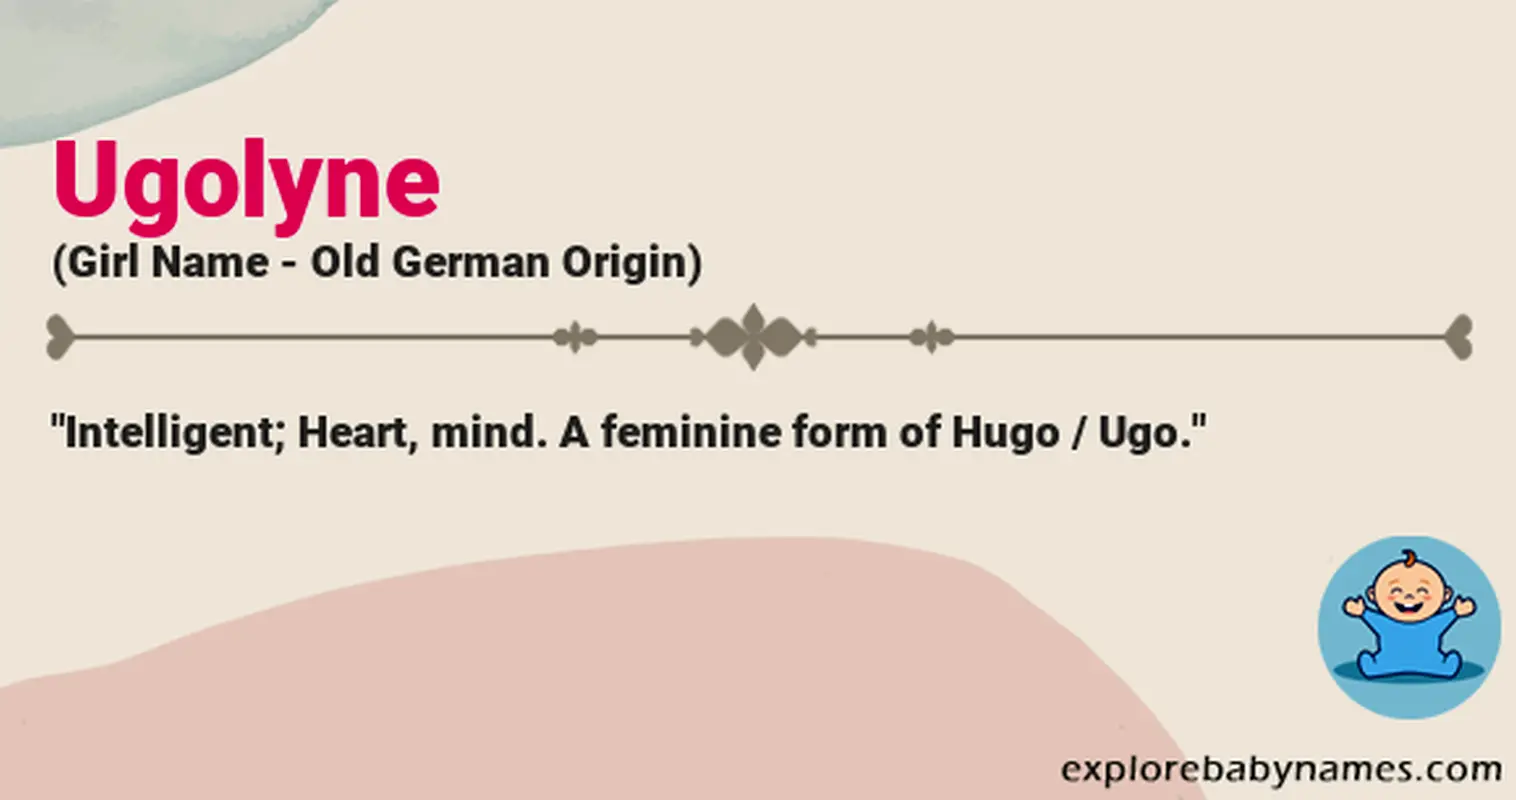 Meaning of Ugolyne